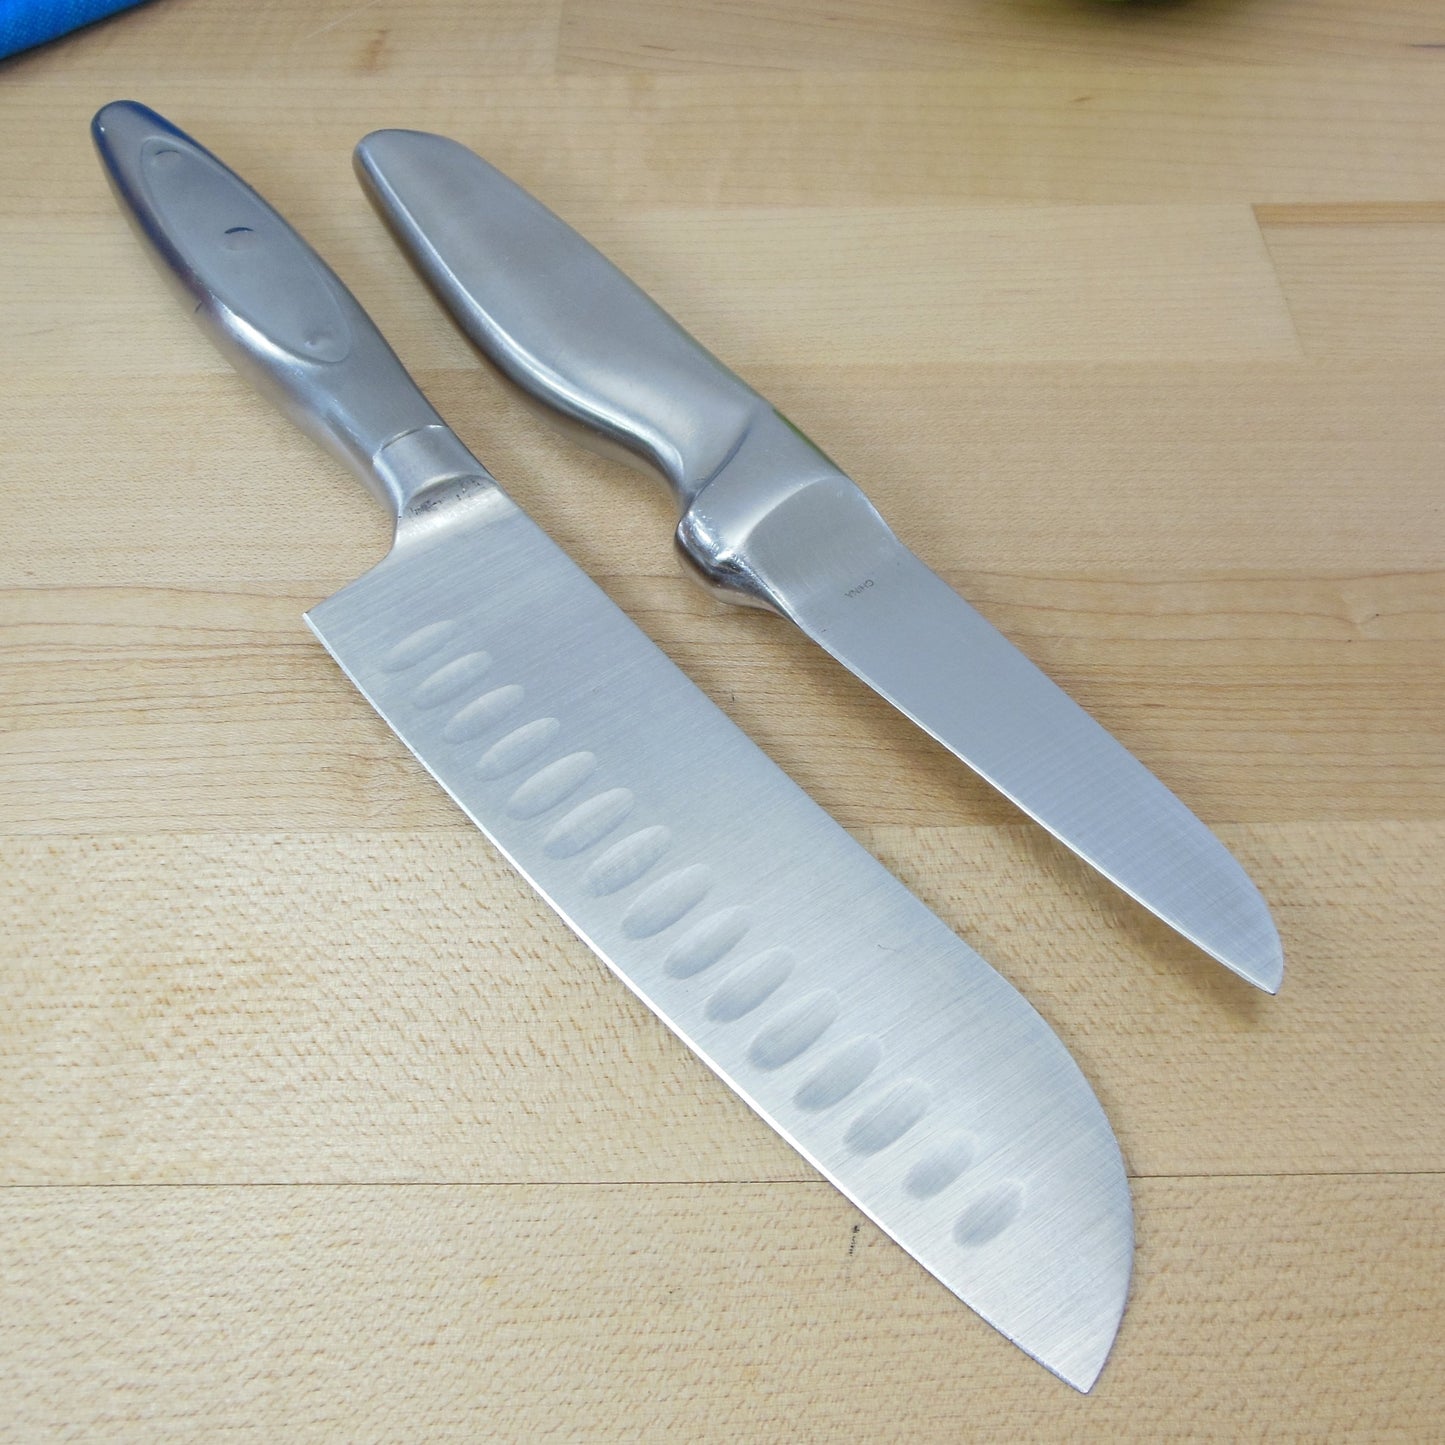 Cuisinart 5" Santoku or Hoffritz 3" Paring Knife Stainless Handles - Your Choice of One